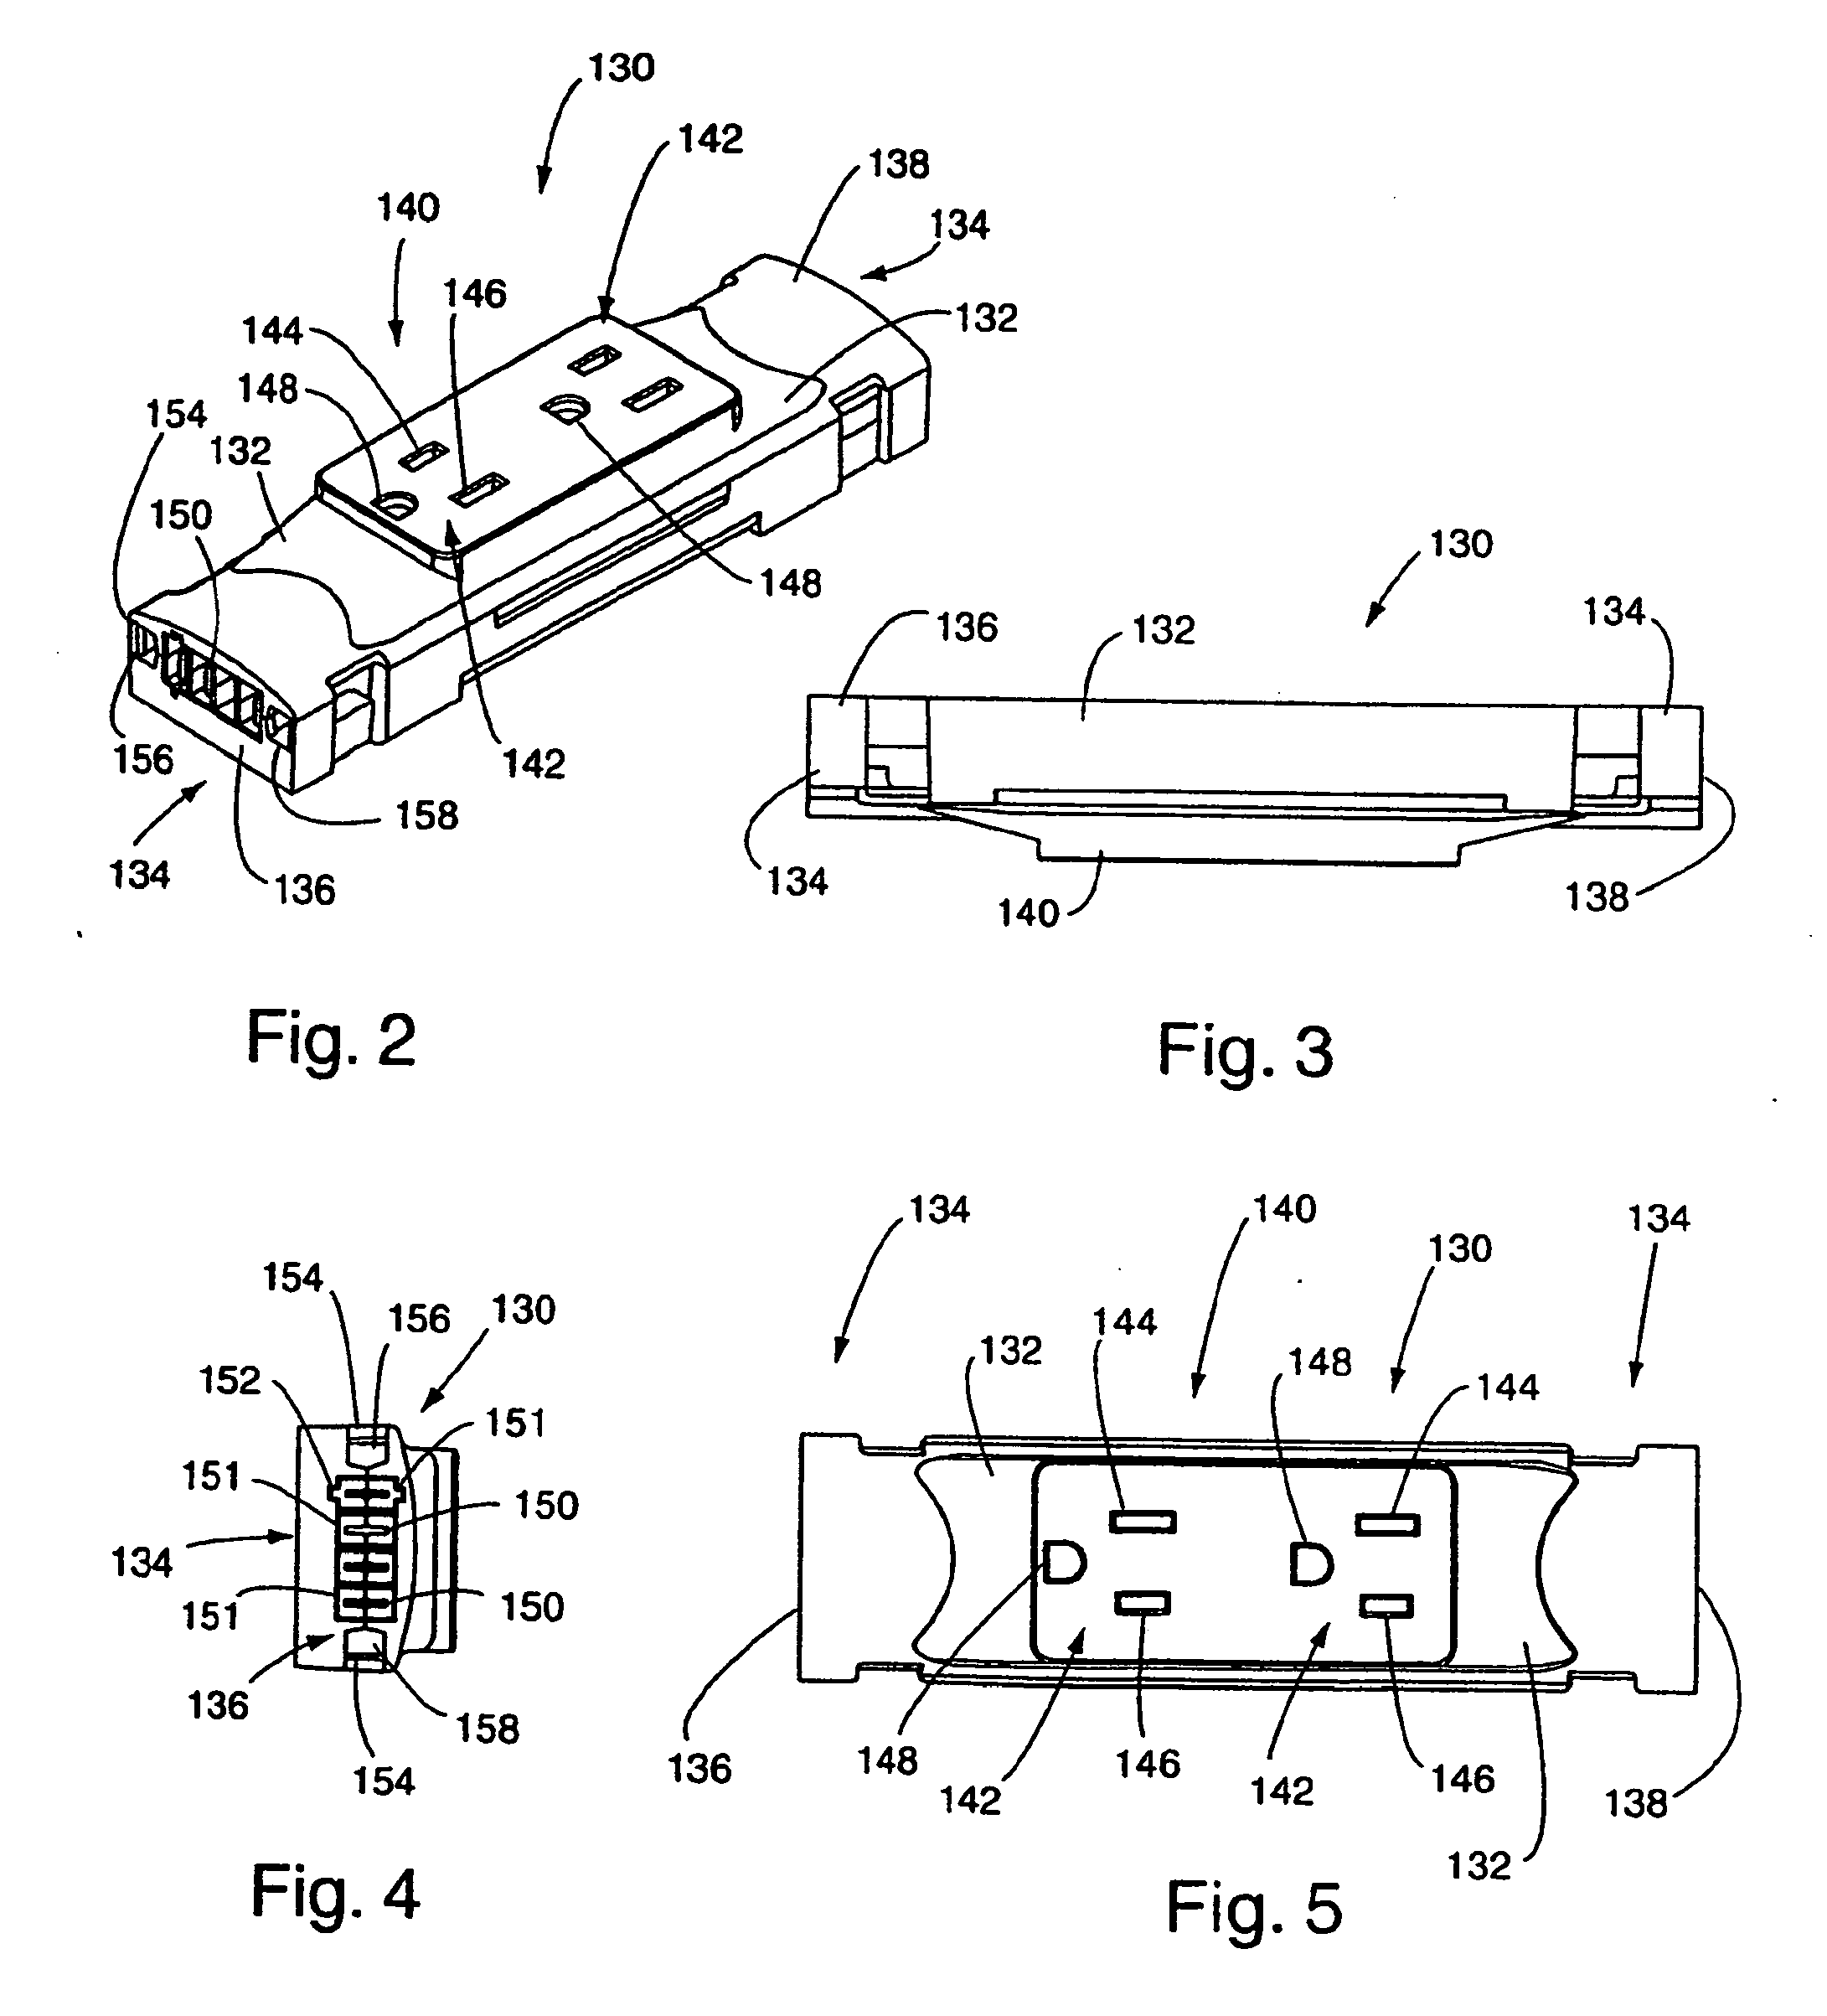 Modular electrical system including back-to-back receptacle configurations and capable of providing four wire circuitry